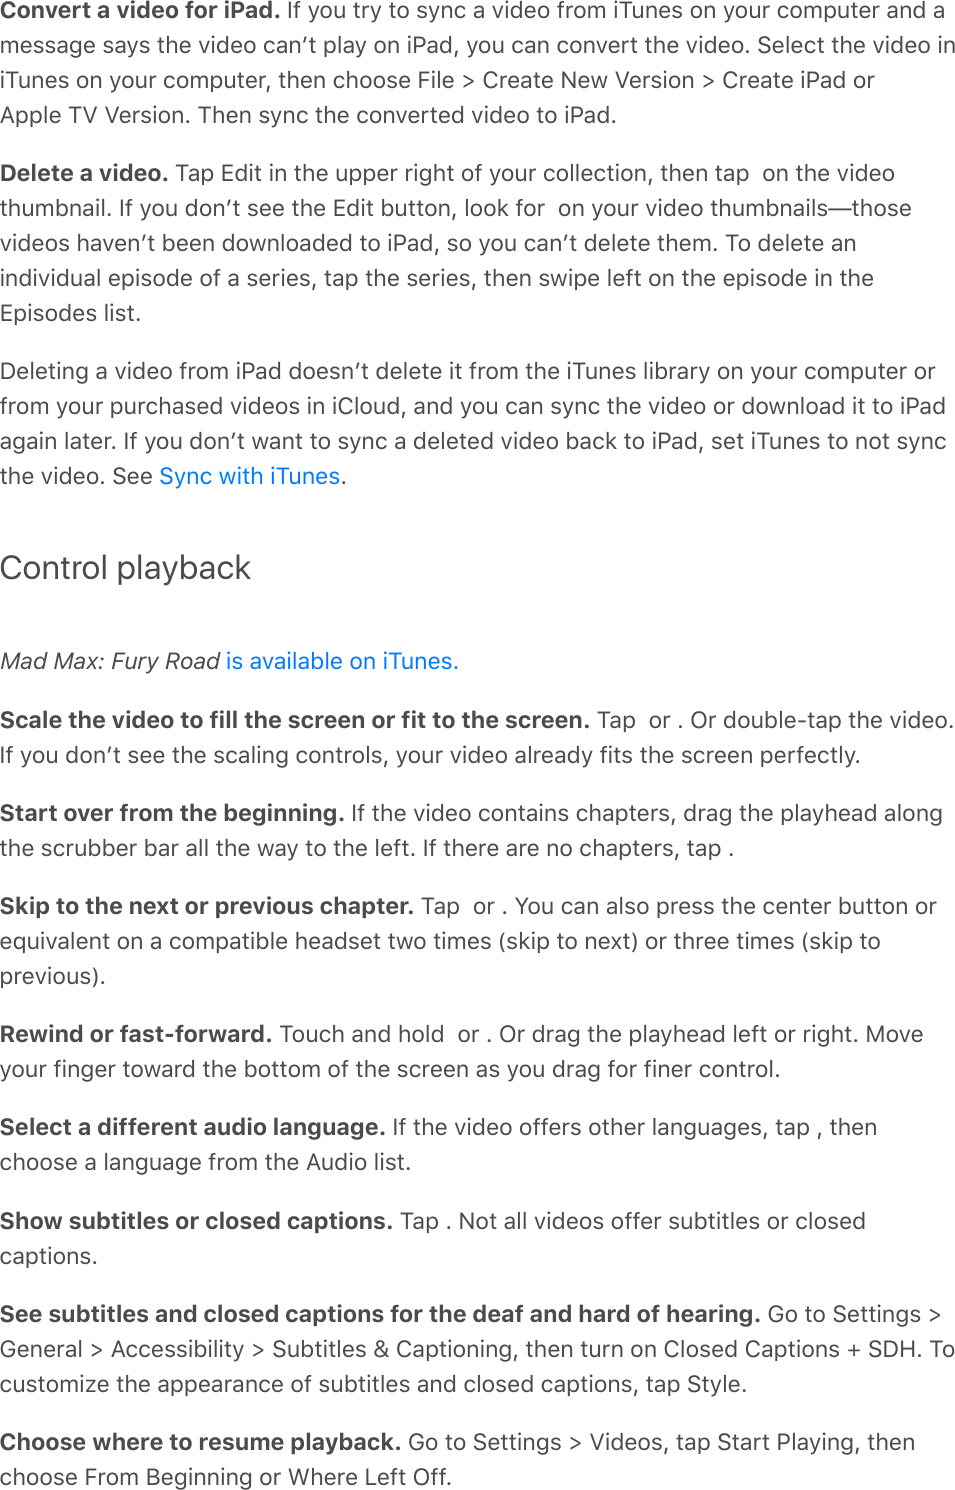 Convert a video for iPad. S9%=2&gt;%&quot;$=%&quot;2%&amp;=0)%#%D.7(2%9$2/%.M&gt;0(&amp;%20%=2&gt;$%)2/-&gt;&quot;($%#07%#/(&amp;&amp;#;(%&amp;#=&amp;%&quot;*(%D.7(2%)#0F&quot;%-3#=%20%.@#7L%=2&gt;%)#0%)20D($&quot;%&quot;*(%D.7(2E%!(3()&quot;%&quot;*(%D.7(2%.0.M&gt;0(&amp;%20%=2&gt;$%)2/-&gt;&quot;($L%&quot;*(0%)*22&amp;(%B.3(%[%4$(#&quot;(%C(1%T($&amp;.20%[%4$(#&quot;(%.@#7%2$?--3(%MT%T($&amp;.20E%M*(0%&amp;=0)%&quot;*(%)20D($&quot;(7%D.7(2%&quot;2%.@#7EDelete a video. M#-%+7.&quot;%.0%&quot;*(%&gt;--($%$.;*&quot;%29%=2&gt;$%)233()&quot;.20L%&quot;*(0%&quot;#-%%20%&quot;*(%D.7(2&quot;*&gt;/50#.3E%S9%=2&gt;%720F&quot;%&amp;((%&quot;*(%+7.&quot;%5&gt;&quot;&quot;20L%322&apos;%92$%%20%=2&gt;$%D.7(2%&quot;*&gt;/50#.3&amp;c&quot;*2&amp;(D.7(2&amp;%*#D(0F&quot;%5((0%721032#7(7%&quot;2%.@#7L%&amp;2%=2&gt;%)#0F&quot;%7(3(&quot;(%&quot;*(/E%M2%7(3(&quot;(%#0.07.D.7&gt;#3%(-.&amp;27(%29%#%&amp;($.(&amp;L%&quot;#-%&quot;*(%&amp;($.(&amp;L%&quot;*(0%&amp;1.-(%3(9&quot;%20%&quot;*(%(-.&amp;27(%.0%&quot;*(+-.&amp;27(&amp;%3.&amp;&quot;EP(3(&quot;.0;%#%D.7(2%9$2/%.@#7%72(&amp;0F&quot;%7(3(&quot;(%.&quot;%9$2/%&quot;*(%.M&gt;0(&amp;%3.5$#$=%20%=2&gt;$%)2/-&gt;&quot;($%2$9$2/%=2&gt;$%-&gt;$)*#&amp;(7%D.7(2&amp;%.0%.432&gt;7L%#07%=2&gt;%)#0%&amp;=0)%&quot;*(%D.7(2%2$%721032#7%.&quot;%&quot;2%.@#7#;#.0%3#&quot;($E%S9%=2&gt;%720F&quot;%1#0&quot;%&quot;2%&amp;=0)%#%7(3(&quot;(7%D.7(2%5#)&apos;%&quot;2%.@#7L%&amp;(&quot;%.M&gt;0(&amp;%&quot;2%02&quot;%&amp;=0)&quot;*(%D.7(2E%!((% EControl playbackMad Max: Fury Road Scale the video to fill the screen or fit to the screen. M#-%%2$%E%G$%72&gt;53(Q&quot;#-%&quot;*(%D.7(2ES9%=2&gt;%720F&quot;%&amp;((%&quot;*(%&amp;)#3.0;%)20&quot;$23&amp;L%=2&gt;$%D.7(2%#3$(#7=%9.&quot;&amp;%&quot;*(%&amp;)$((0%-($9()&quot;3=EStart over from the beginning. S9%&quot;*(%D.7(2%)20&quot;#.0&amp;%)*#-&quot;($&amp;L%7$#;%&quot;*(%-3#=*(#7%#320;&quot;*(%&amp;)$&gt;55($%5#$%#33%&quot;*(%1#=%&quot;2%&quot;*(%3(9&quot;E%S9%&quot;*($(%#$(%02%)*#-&quot;($&amp;L%&quot;#-%ESkip to the next or previous chapter. M#-%%2$%E%Y2&gt;%)#0%#3&amp;2%-$(&amp;&amp;%&quot;*(%)(0&quot;($%5&gt;&quot;&quot;20%2$(]&gt;.D#3(0&quot;%20%#%)2/-#&quot;.53(%*(#7&amp;(&quot;%&quot;12%&quot;./(&amp;%W&amp;&apos;.-%&quot;2%0(,&quot;X%2$%&quot;*$((%&quot;./(&amp;%W&amp;&apos;.-%&quot;2-$(D.2&gt;&amp;XERewind or fast-forward. M2&gt;)*%#07%*237%%2$%E%G$%7$#;%&quot;*(%-3#=*(#7%3(9&quot;%2$%$.;*&quot;E%82D(=2&gt;$%9.0;($%&quot;21#$7%&quot;*(%52&quot;&quot;2/%29%&quot;*(%&amp;)$((0%#&amp;%=2&gt;%7$#;%92$%9.0($%)20&quot;$23ESelect a different audio language. S9%&quot;*(%D.7(2%299($&amp;%2&quot;*($%3#0;&gt;#;(&amp;L%&quot;#-%L%&quot;*(0)*22&amp;(%#%3#0;&gt;#;(%9$2/%&quot;*(%?&gt;7.2%3.&amp;&quot;EShow subtitles or closed captions. M#-%E%C2&quot;%#33%D.7(2&amp;%299($%&amp;&gt;5&quot;.&quot;3(&amp;%2$%)32&amp;(7)#-&quot;.20&amp;ESee subtitles and closed captions for the deaf and hard of hearing. 62%&quot;2%!(&quot;&quot;.0;&amp;%[6(0($#3%[%?))(&amp;&amp;.5.3.&quot;=%[%!&gt;5&quot;.&quot;3(&amp;%\%4#-&quot;.20.0;L%&quot;*(0%&quot;&gt;$0%20%432&amp;(7%4#-&quot;.20&amp;%b%!PAE%M2)&gt;&amp;&quot;2/.K(%&quot;*(%#--(#$#0)(%29%&amp;&gt;5&quot;.&quot;3(&amp;%#07%)32&amp;(7%)#-&quot;.20&amp;L%&quot;#-%!&quot;=3(EChoose where to resume playback. 62%&quot;2%!(&quot;&quot;.0;&amp;%[%T.7(2&amp;L%&quot;#-%!&quot;#$&quot;%@3#=.0;L%&quot;*(0)*22&amp;(%B$2/%J(;.00.0;%2$%&lt;*($(%V(9&quot;%G99E!=0)%1.&quot;*%.M&gt;0(&amp;.&amp;%#D#.3#53(%20%.M&gt;0(&amp;E